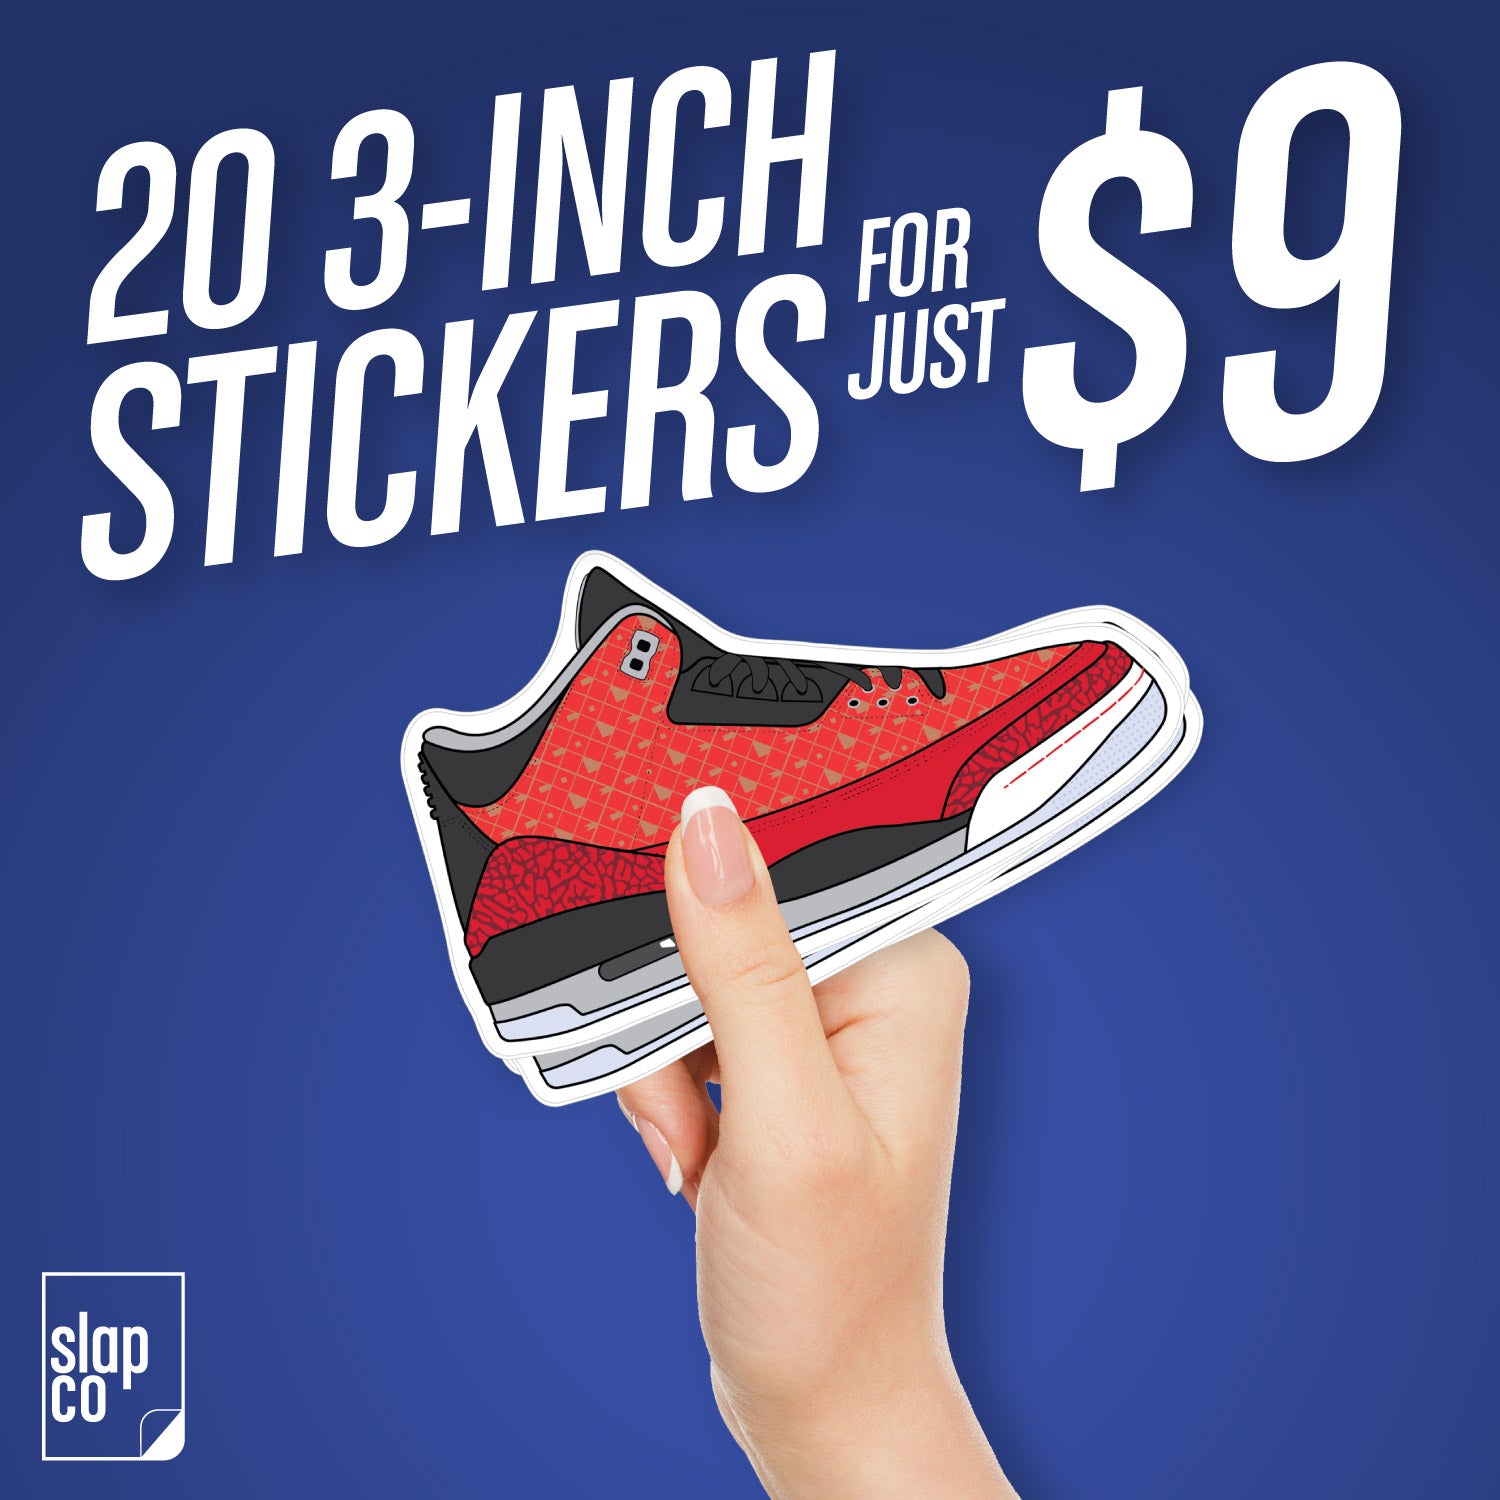 20 3-inch Stickers for $9